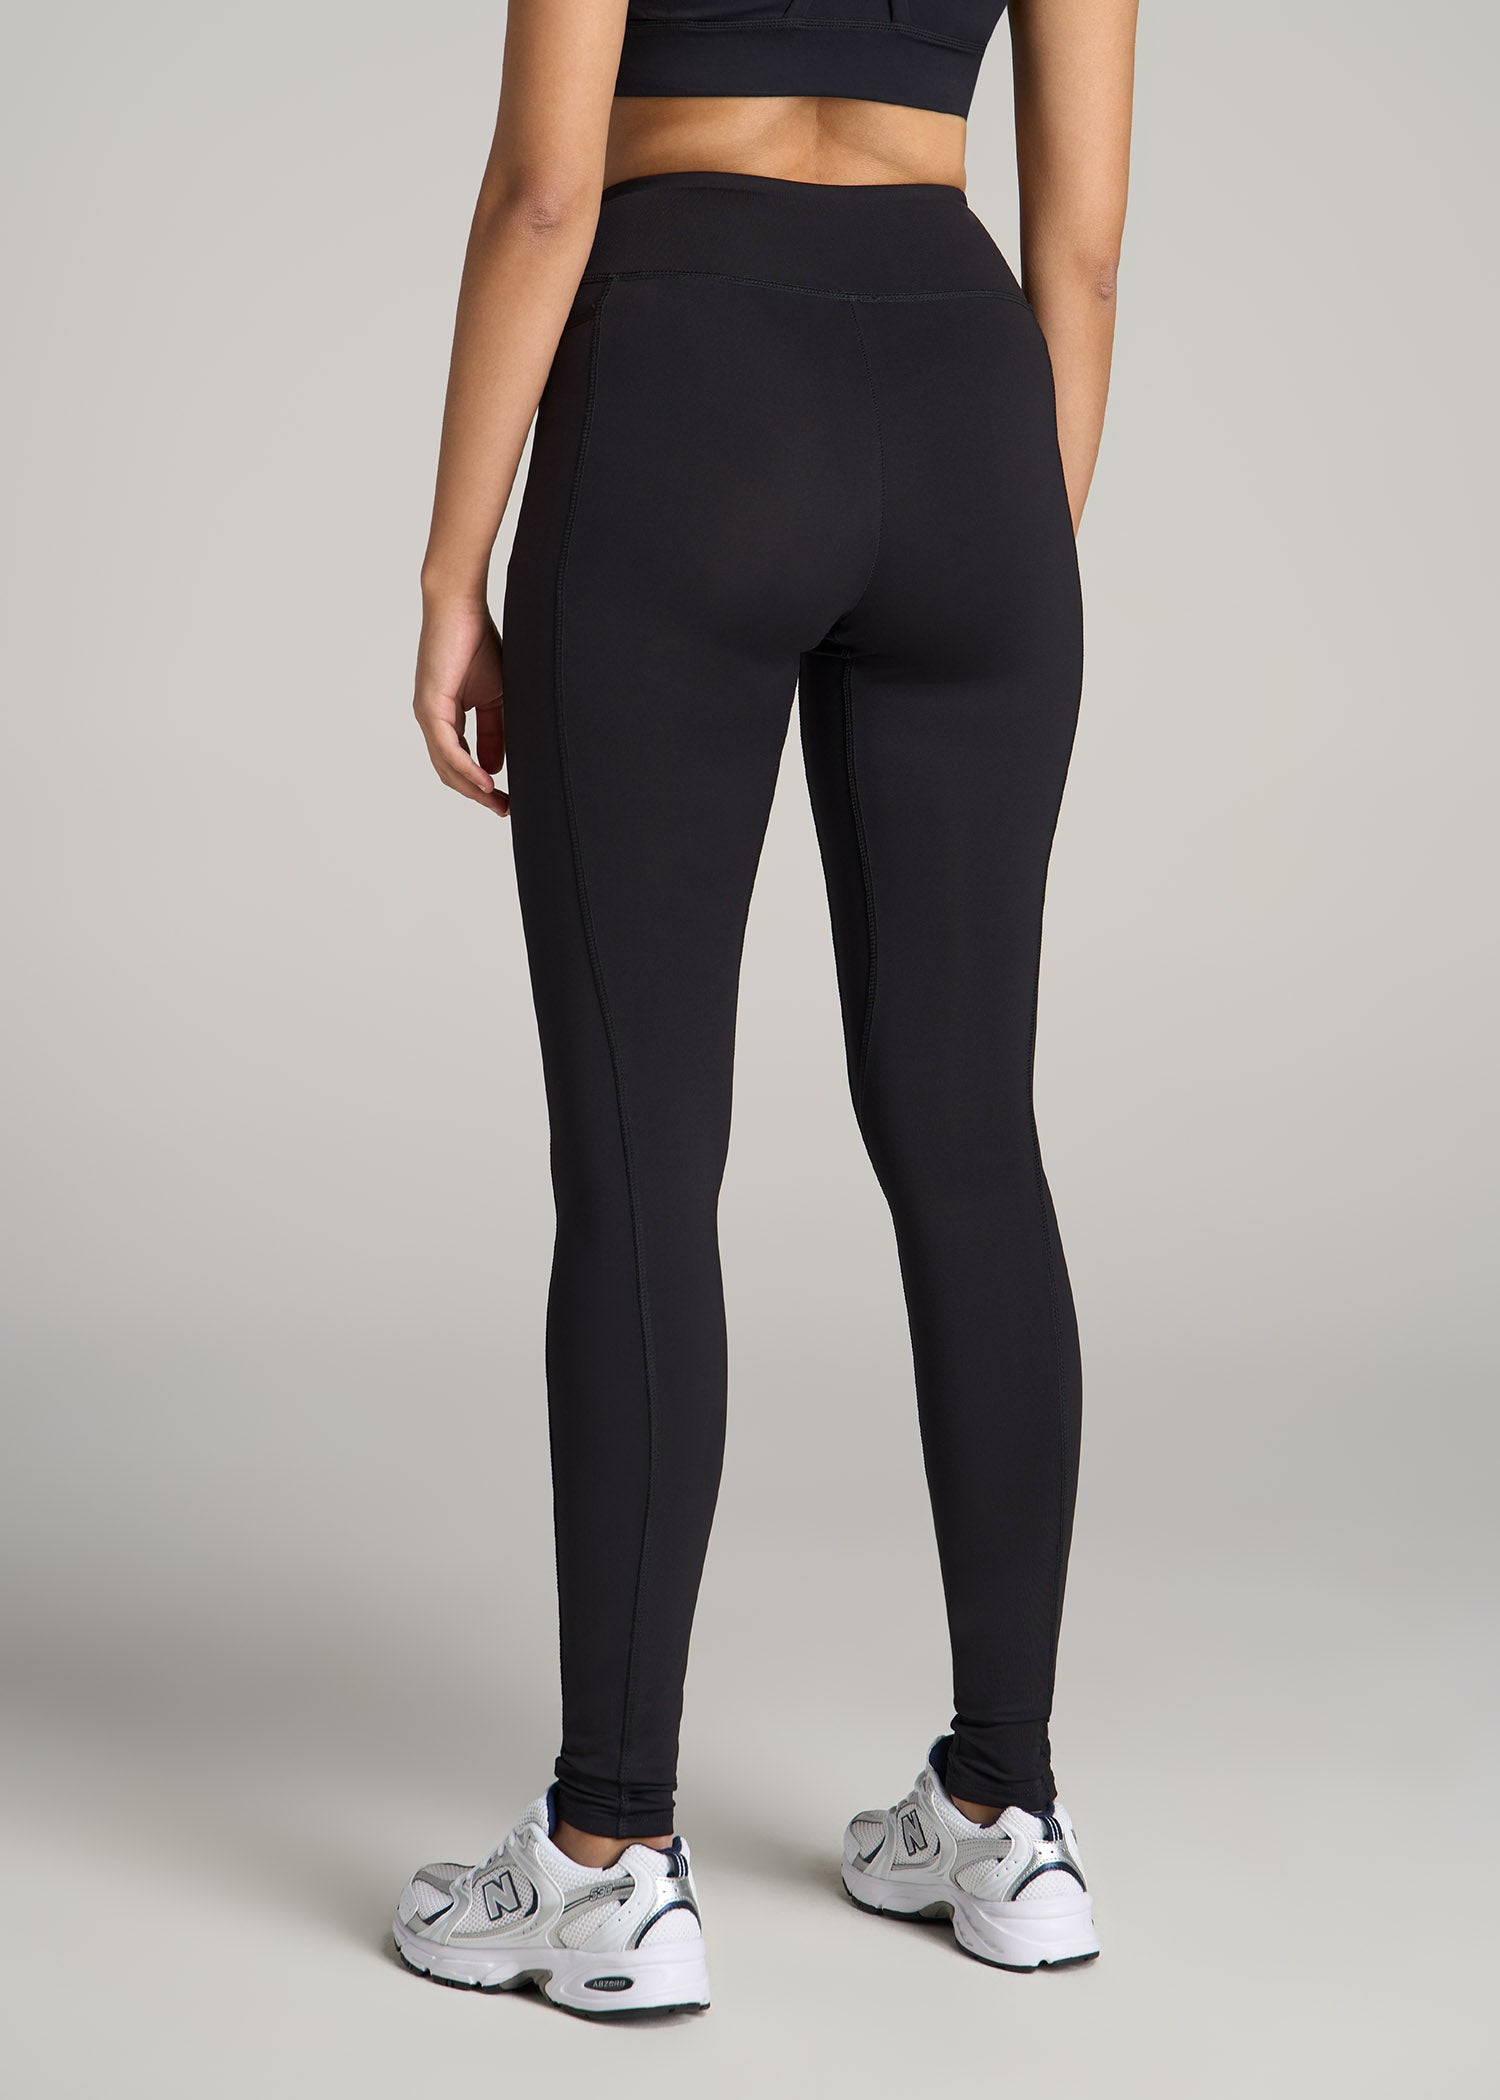 A Woman's Guide to the Best Run Leggings - The B-Word Blog